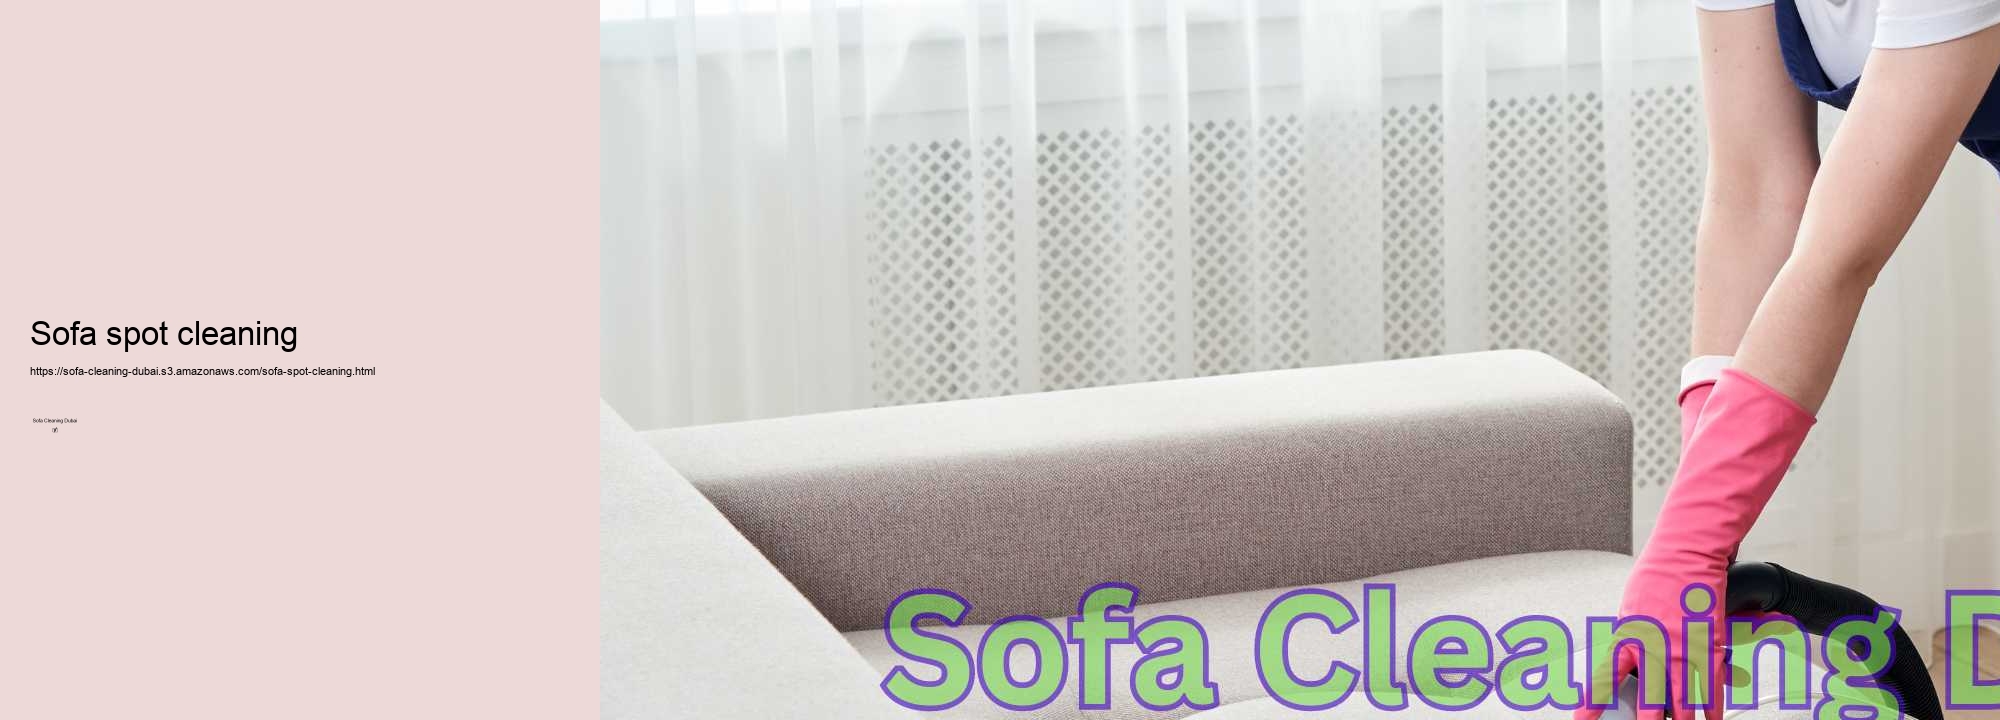 Sofa spot cleaning